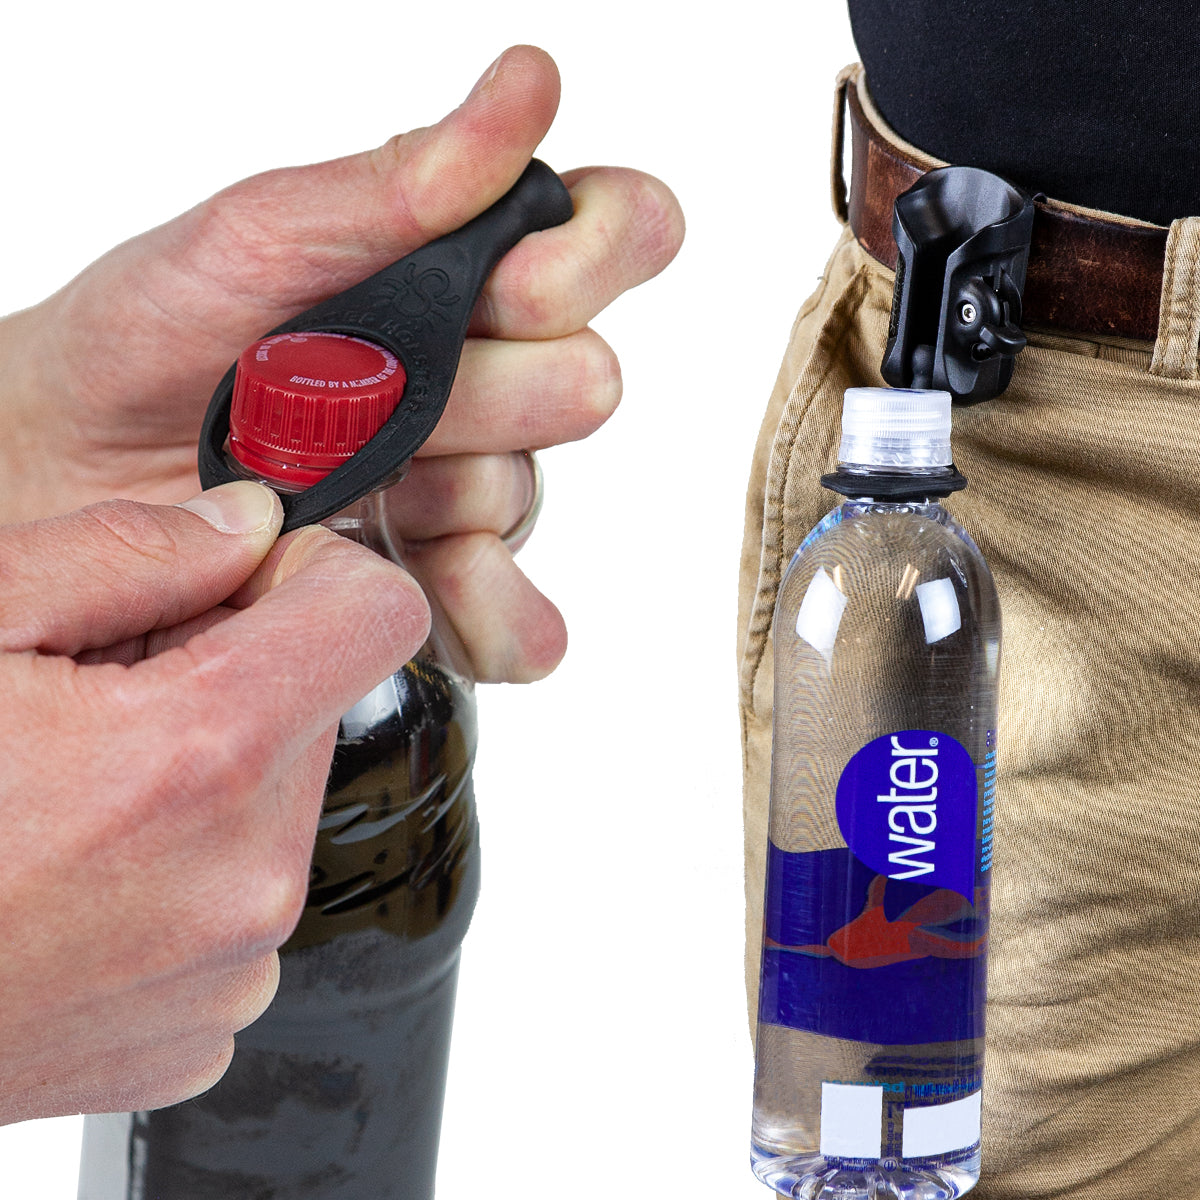 5070TH: Bottle Grippers